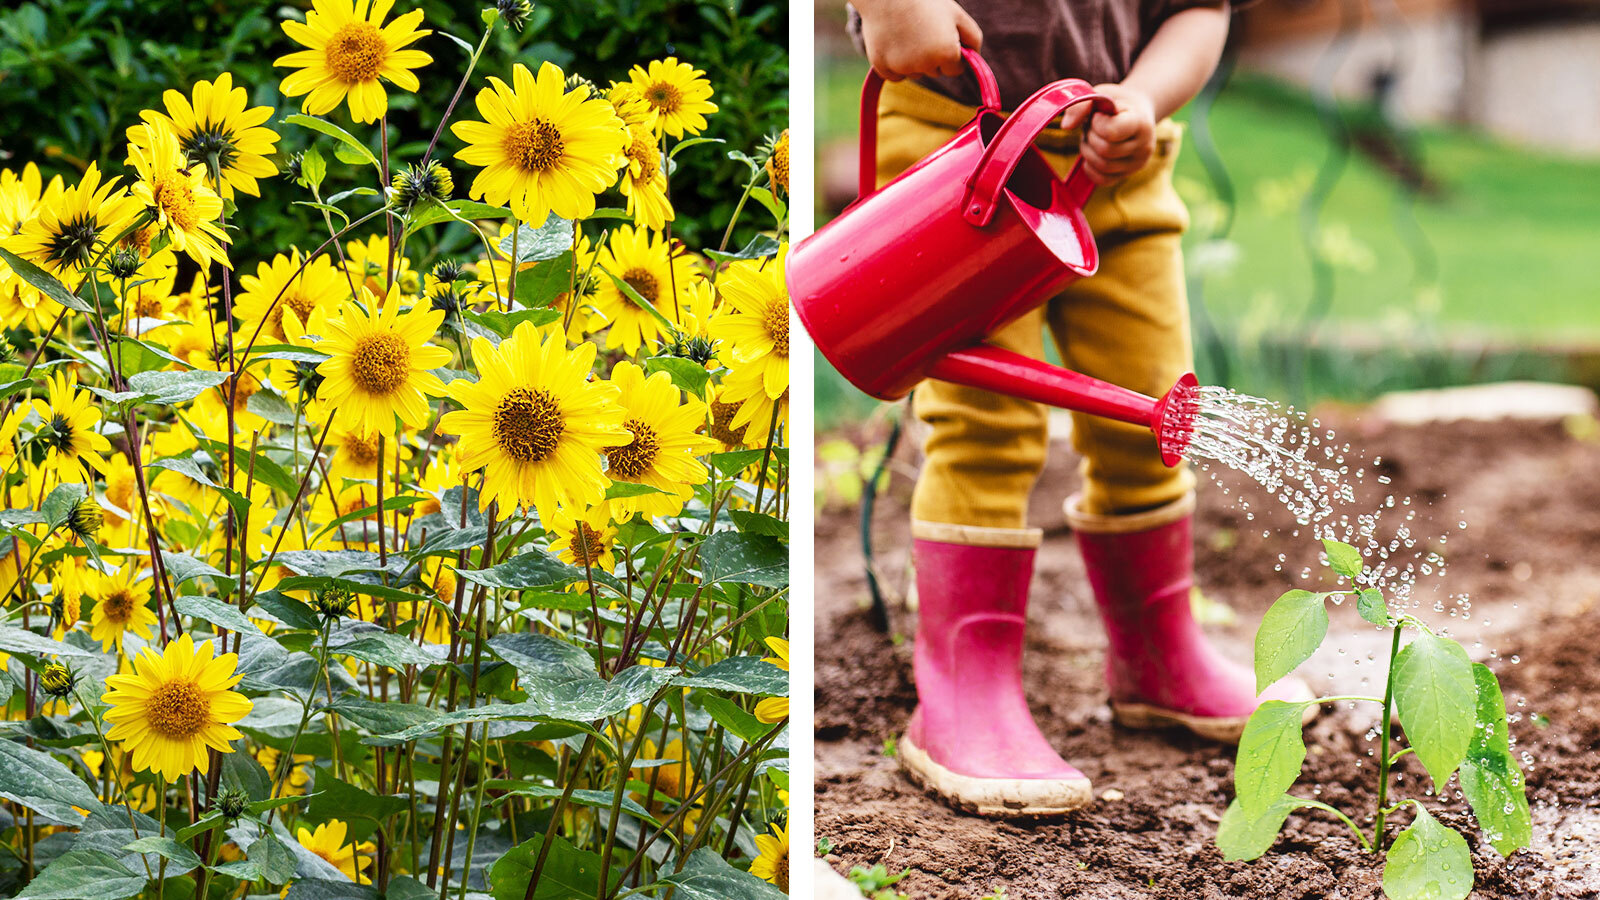 Joe Swift’s tips for gardening with kids, and the best plants to grow